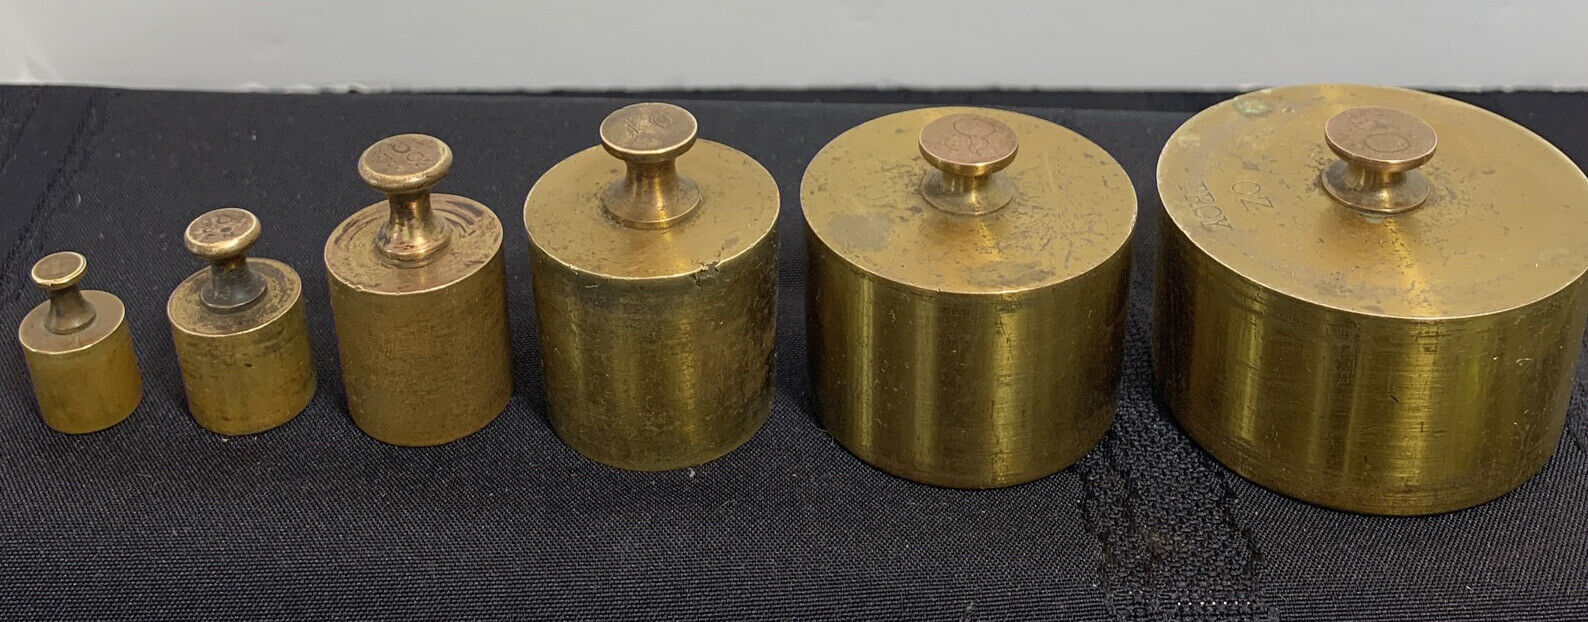 Coins on a scale weight stock photo. Image of brass, estimate - 21804006